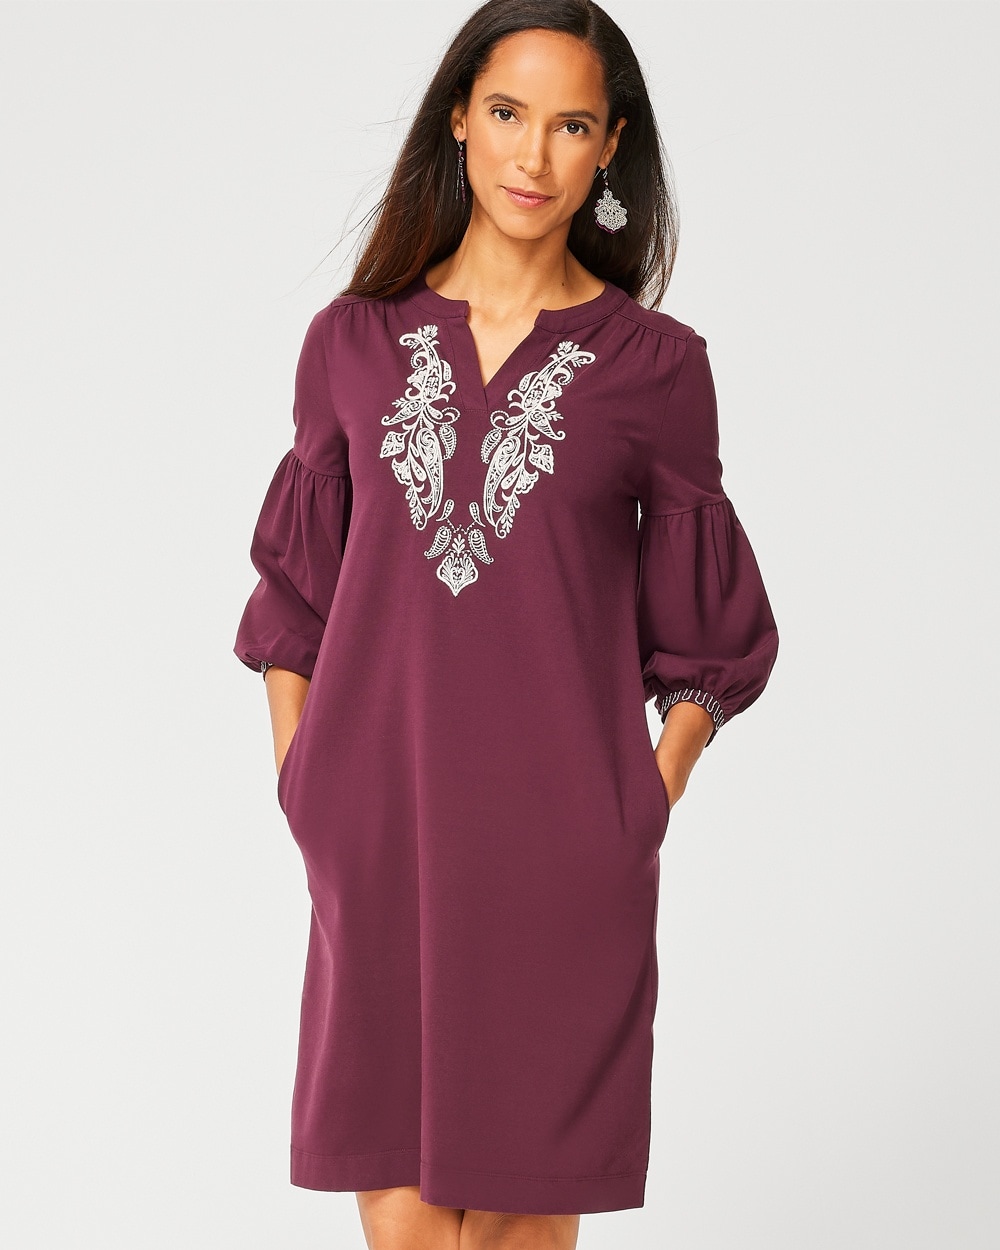 Paisley Placket Embroidered Dress